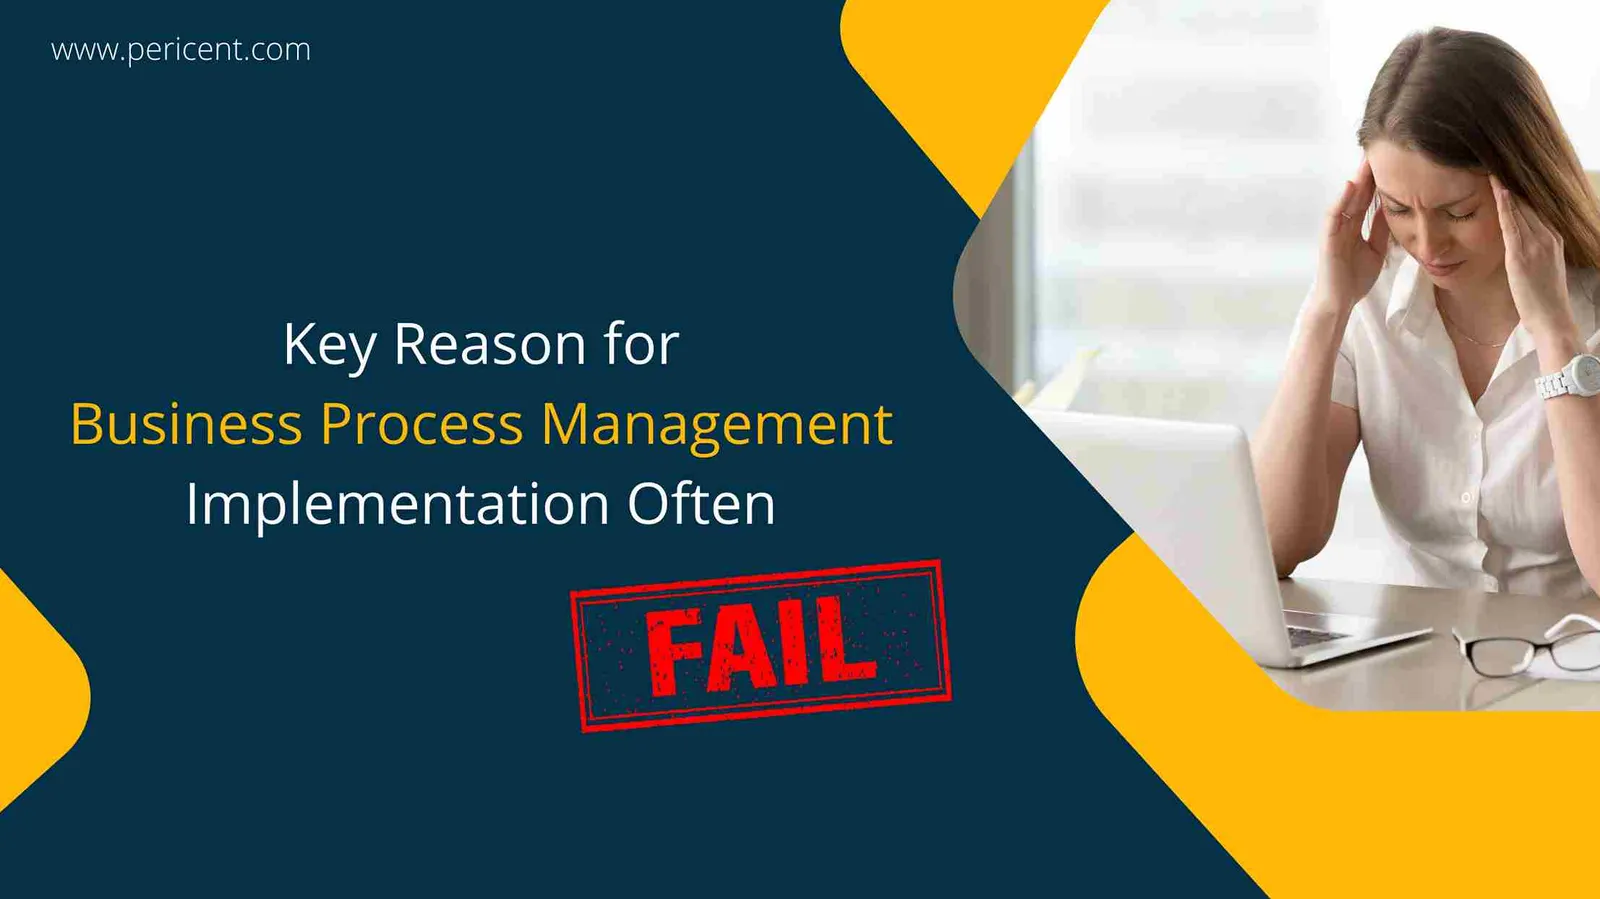 Key Reason for Business Process Management Fail